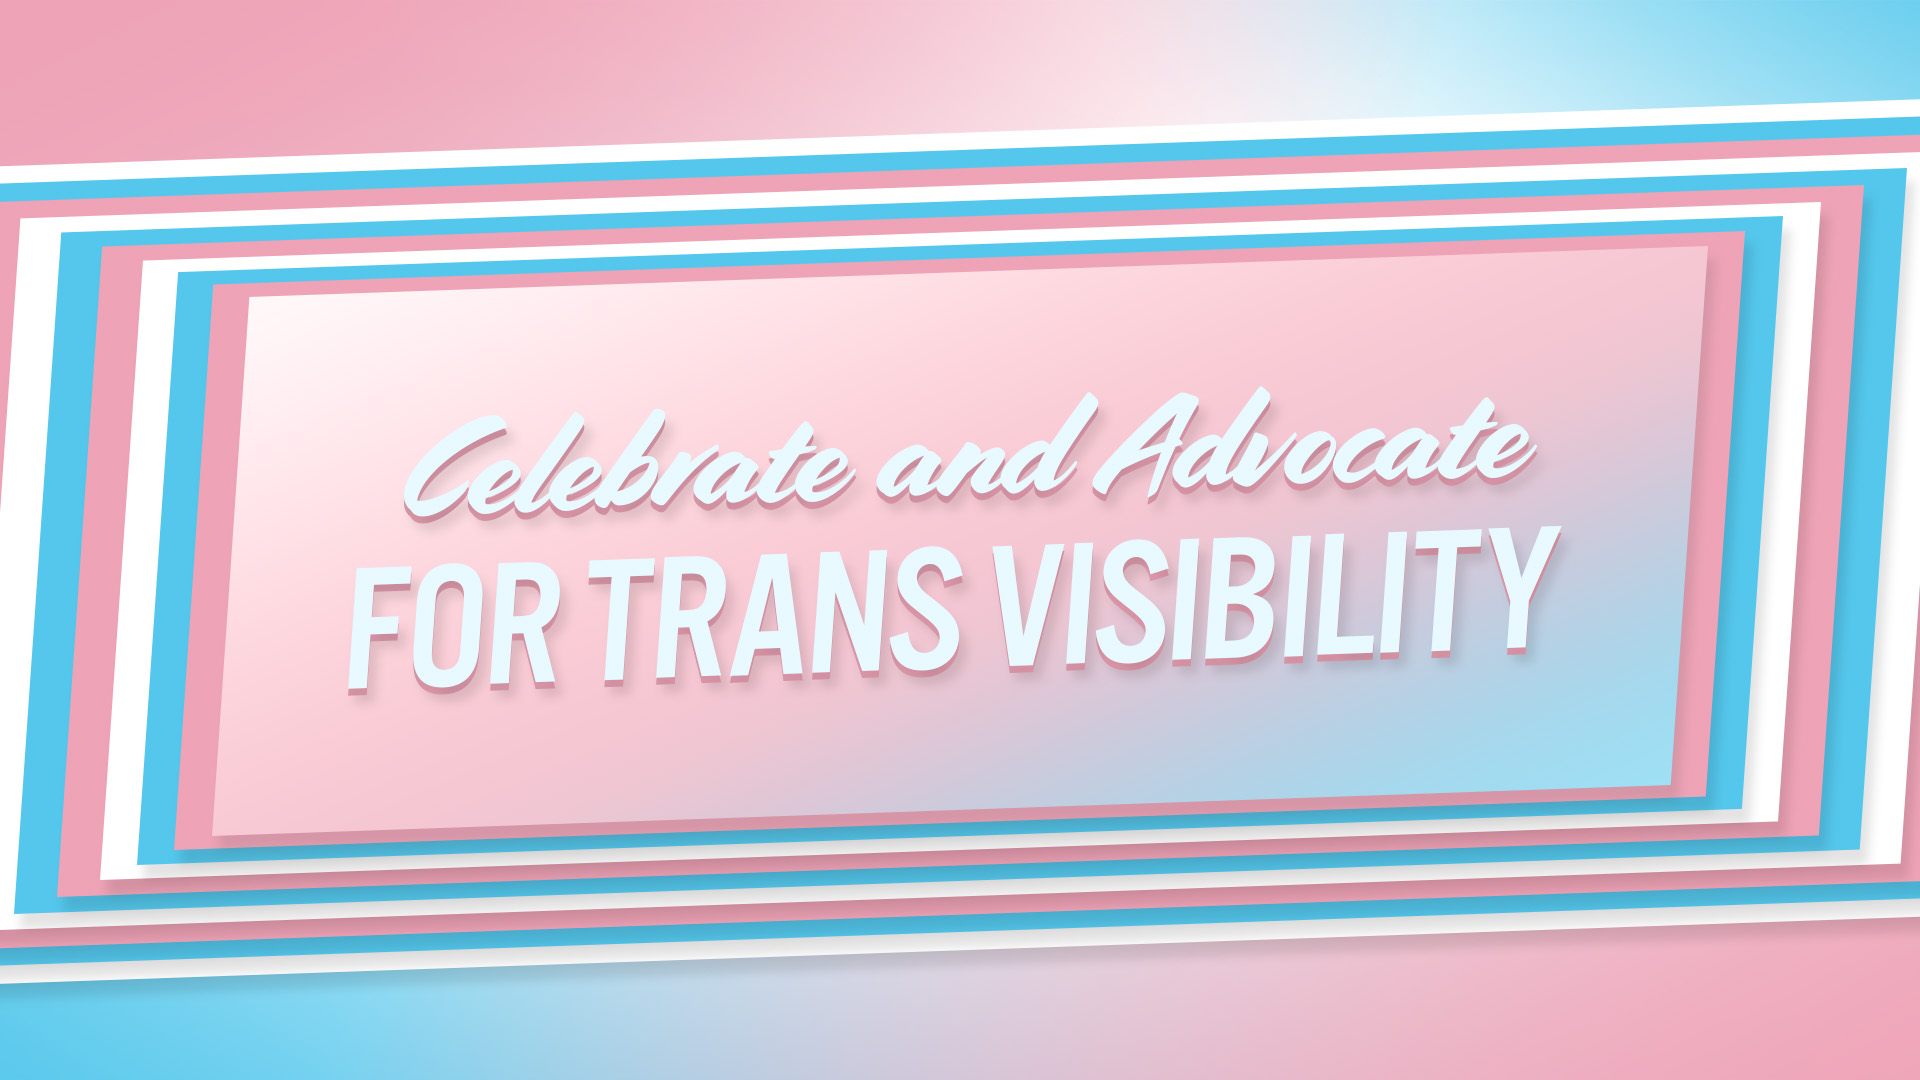 Celebrate and Advocate for Trans Visibility